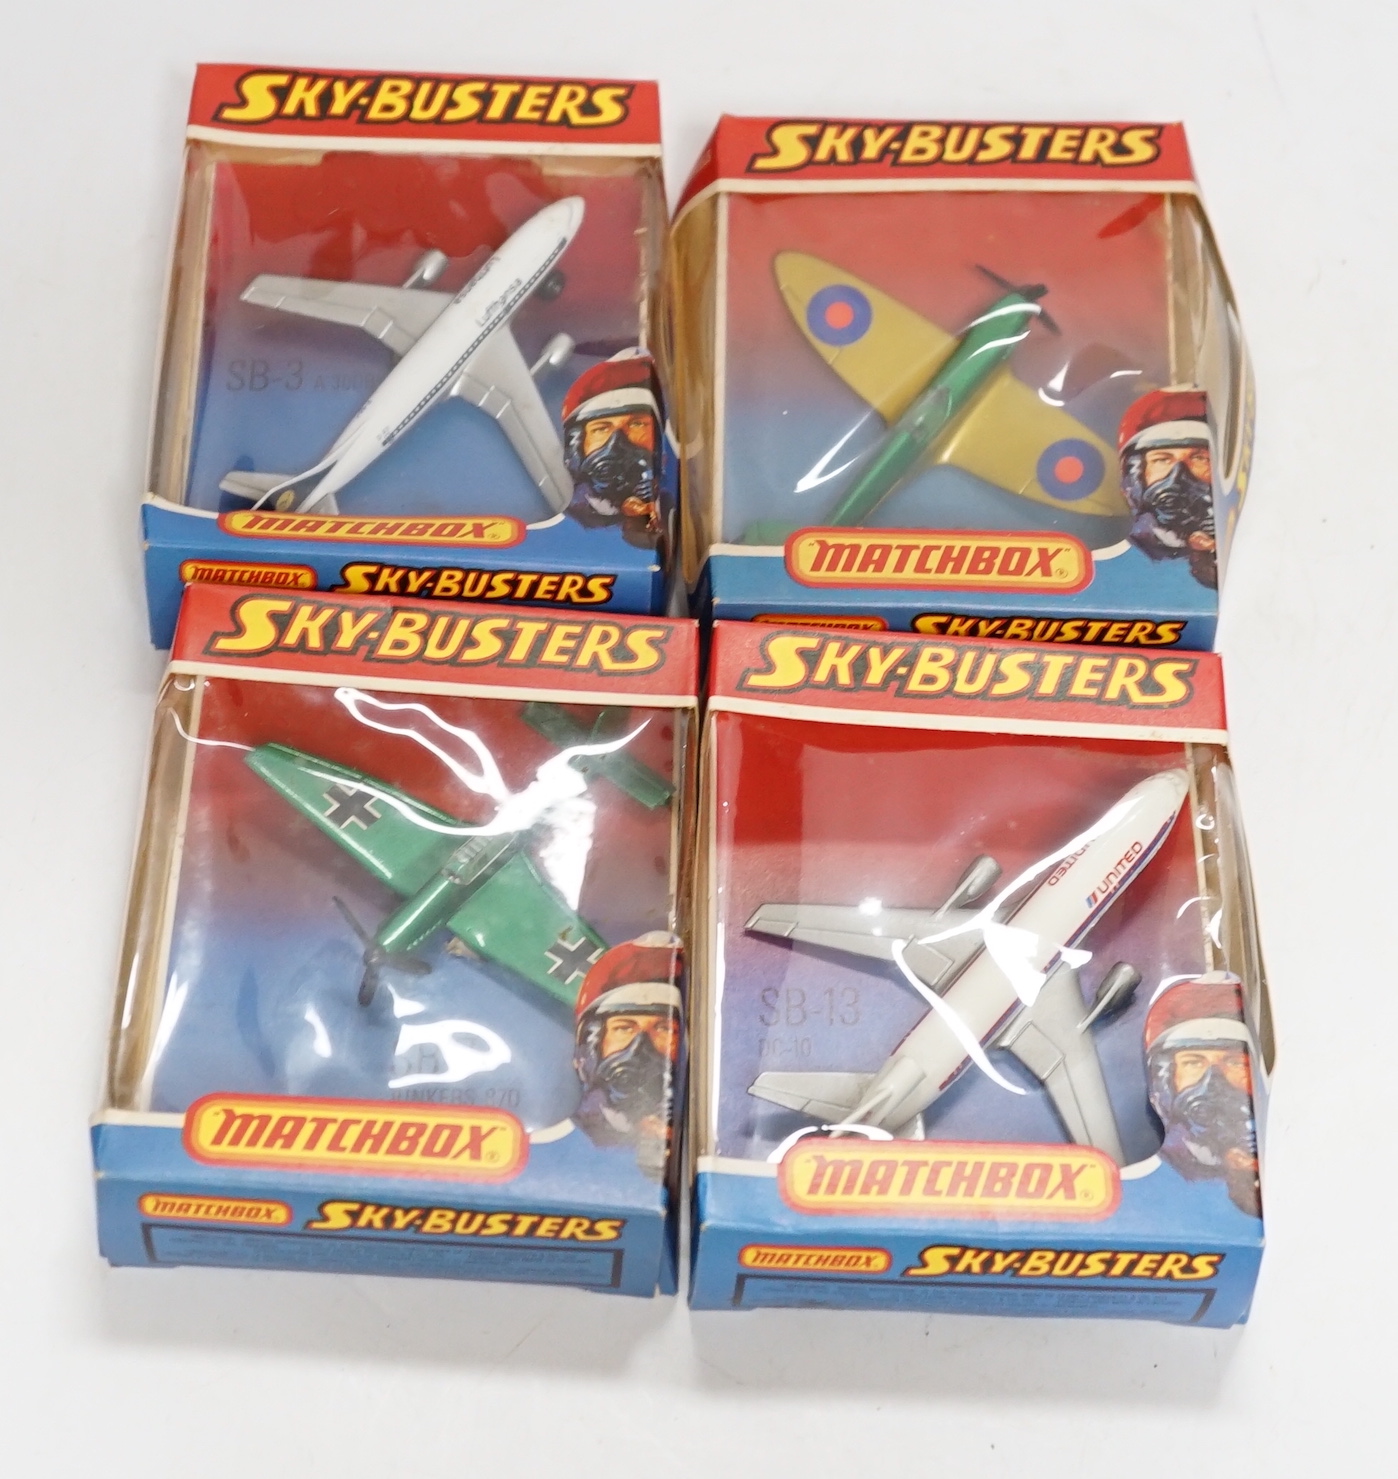 Thirty one boxed 1970s Matchbox Sky Busters diecast aircraft, together with two 1980s Matchbox ‘Super Value Packs’ of diecast vehicles